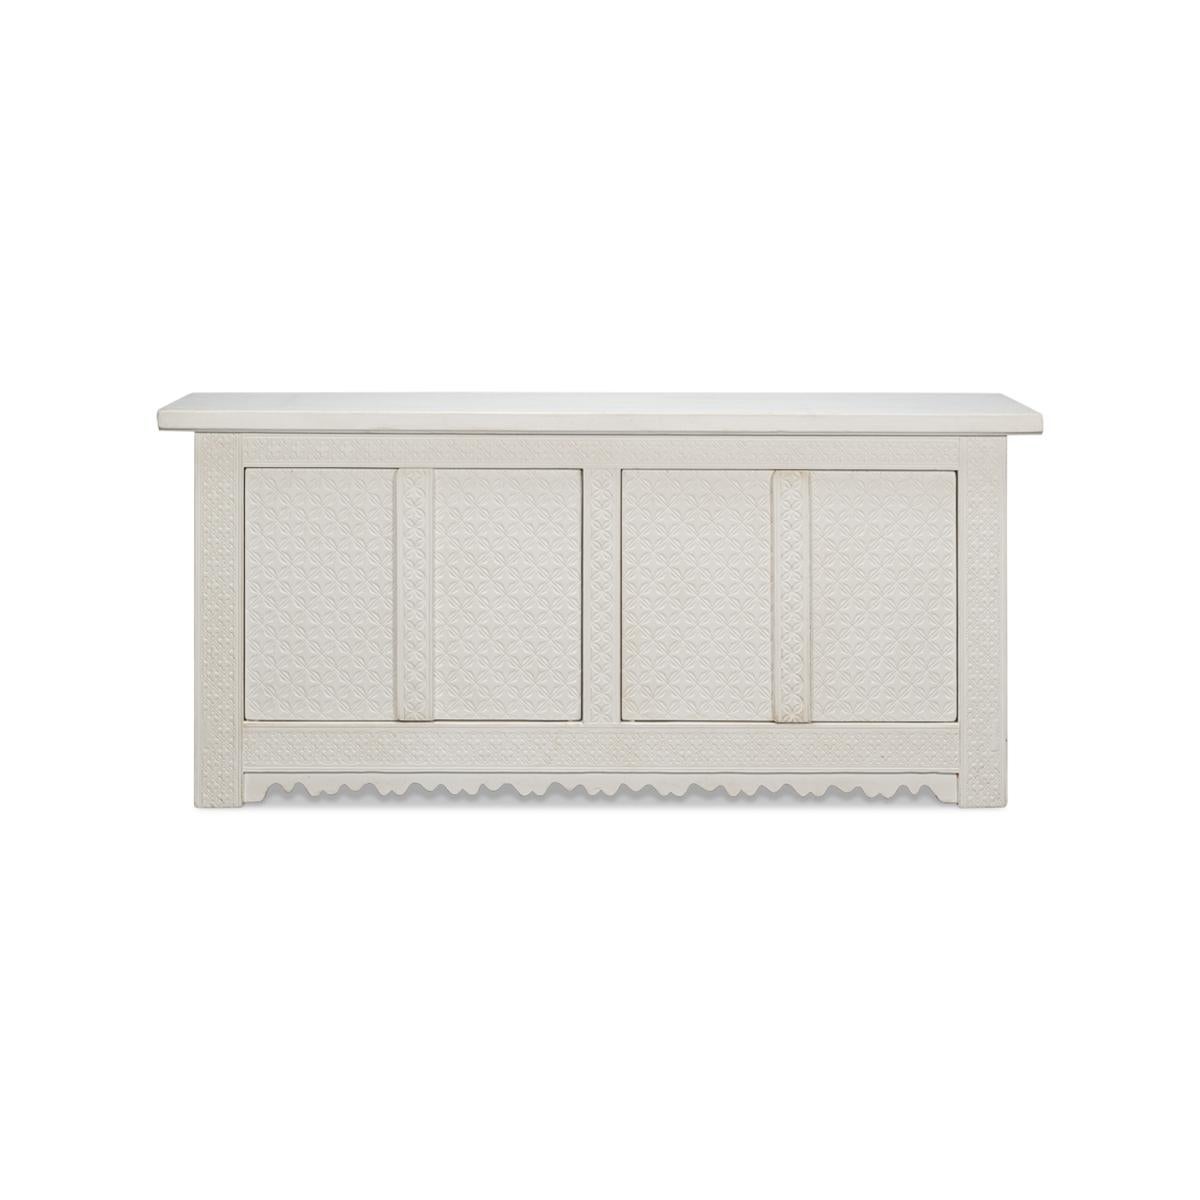 A dynamic piece of furniture suitable for use in a large hallway, in the den, or the dining room. With four doors that open to a painted interior with shelves and made with carved pine and a hand-rubbed antique white finish.

Dimensions: 79